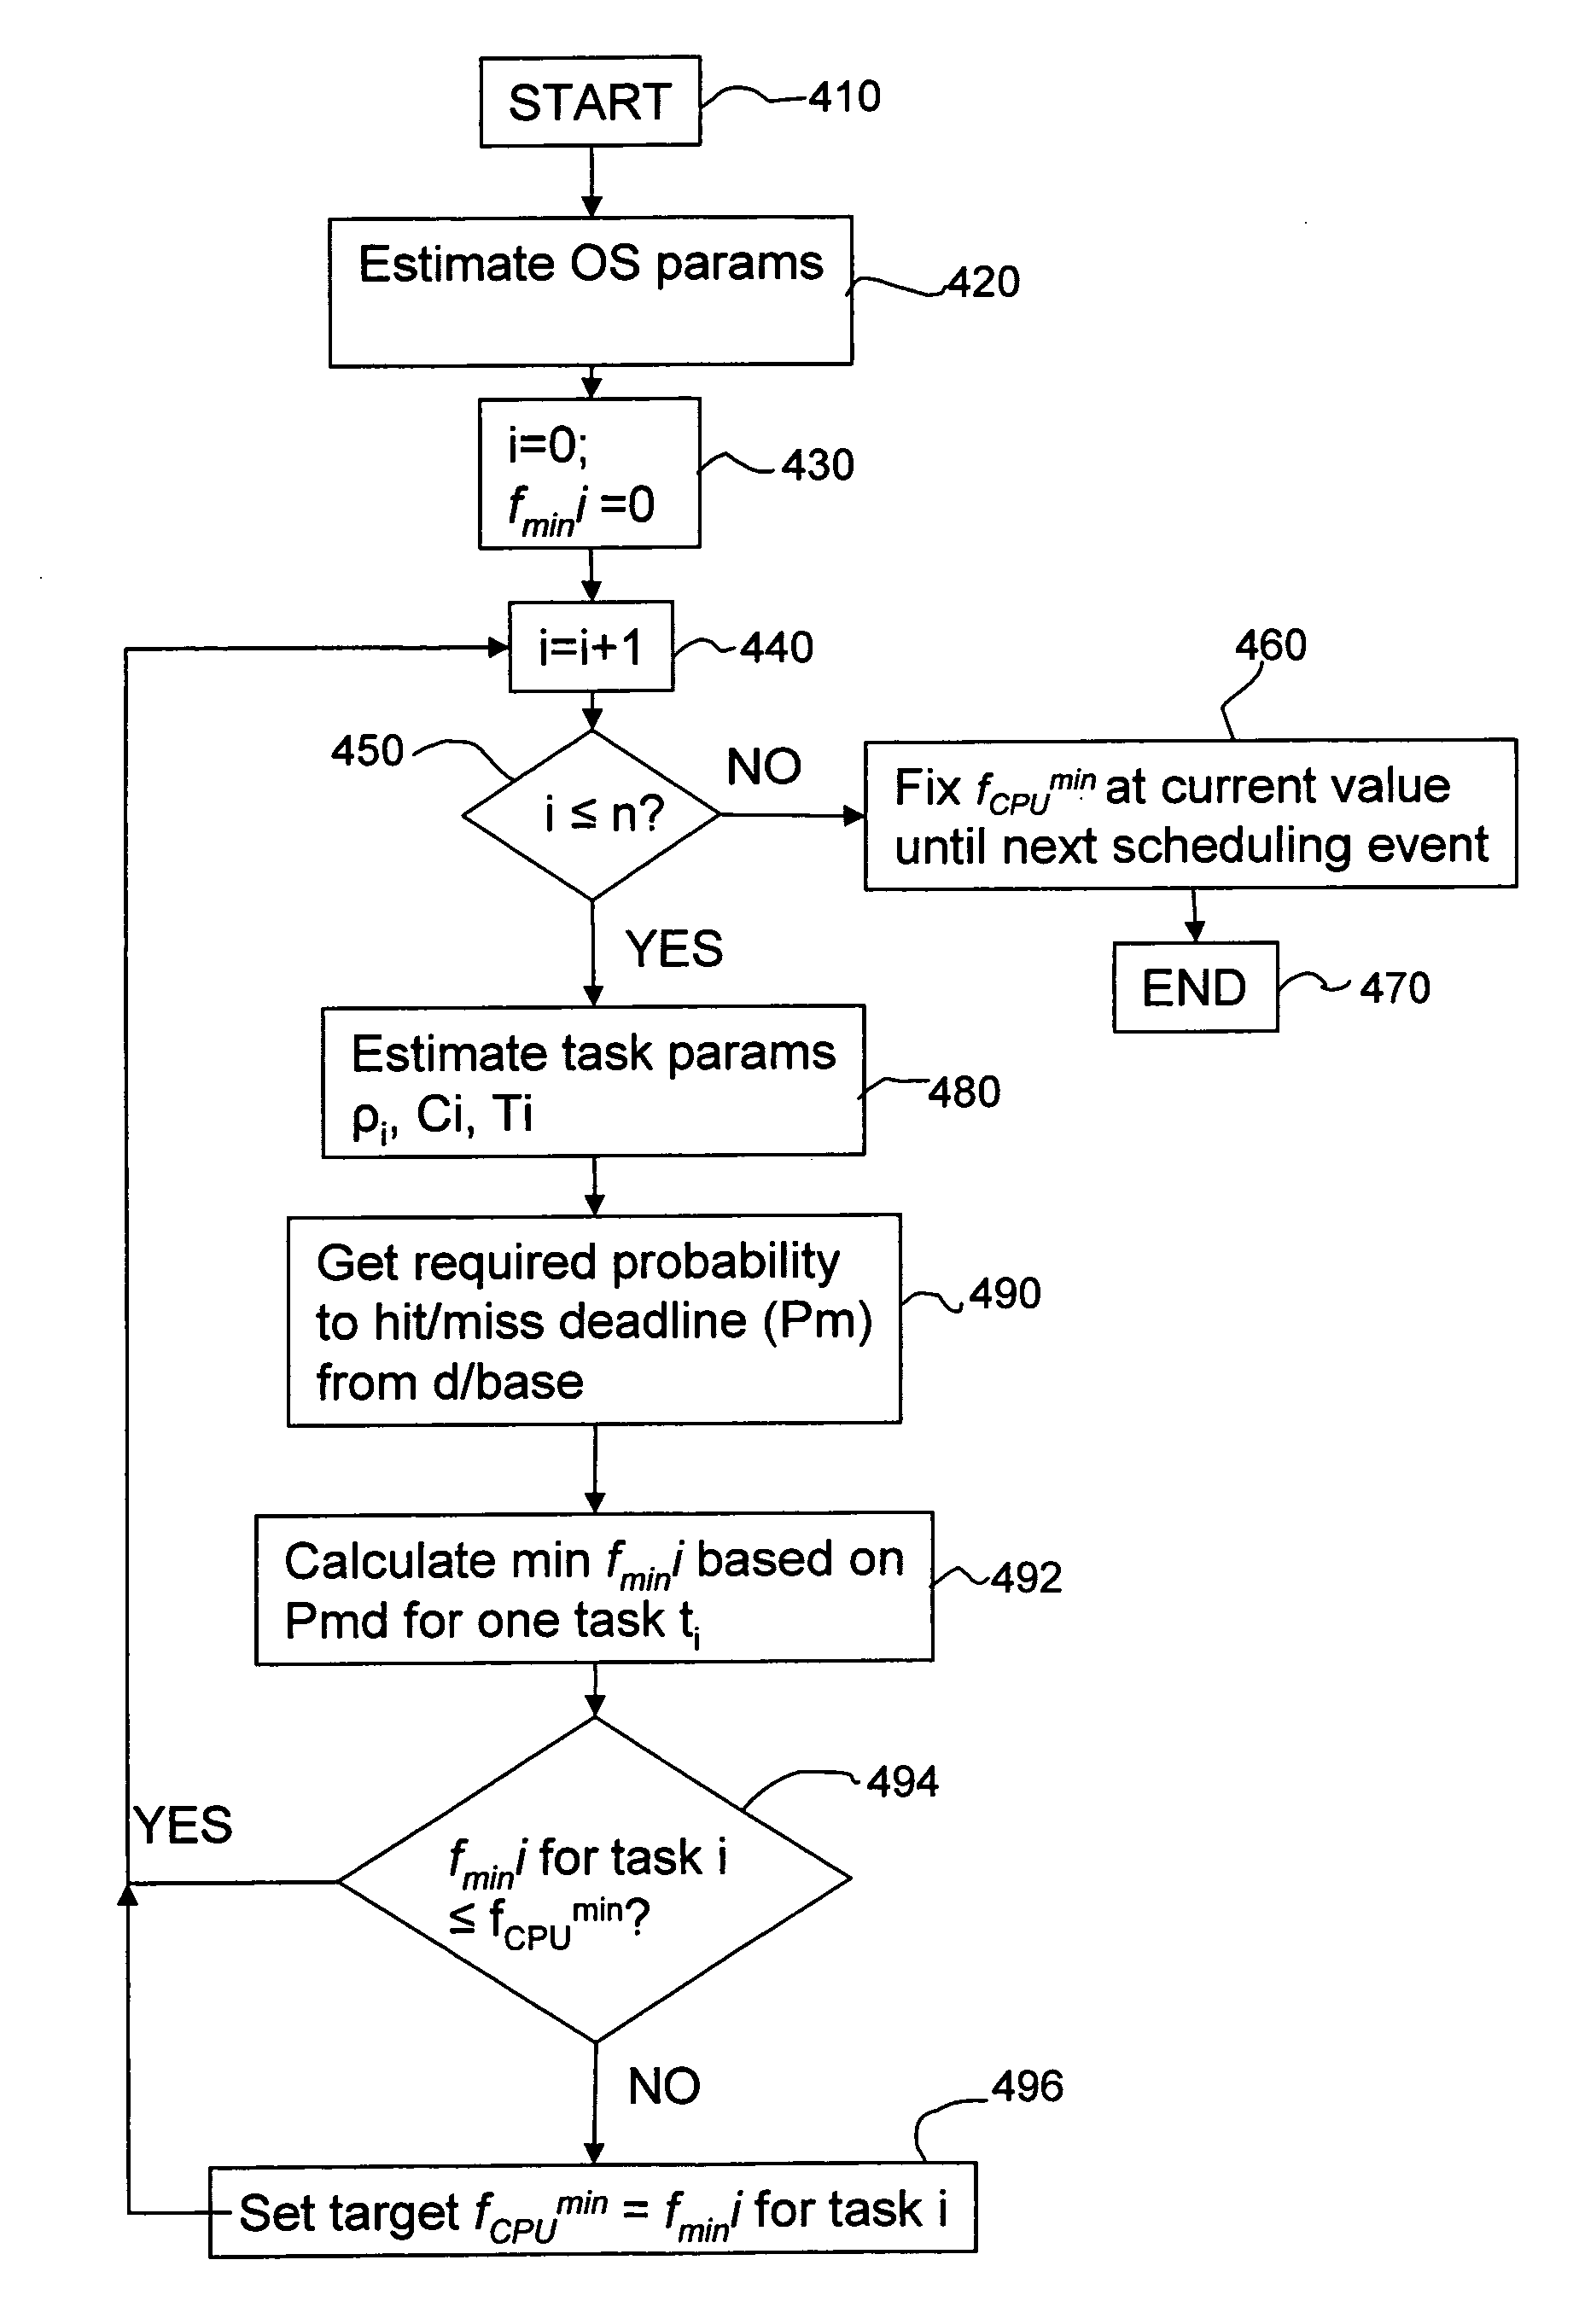 Performance level setting in a data processing system